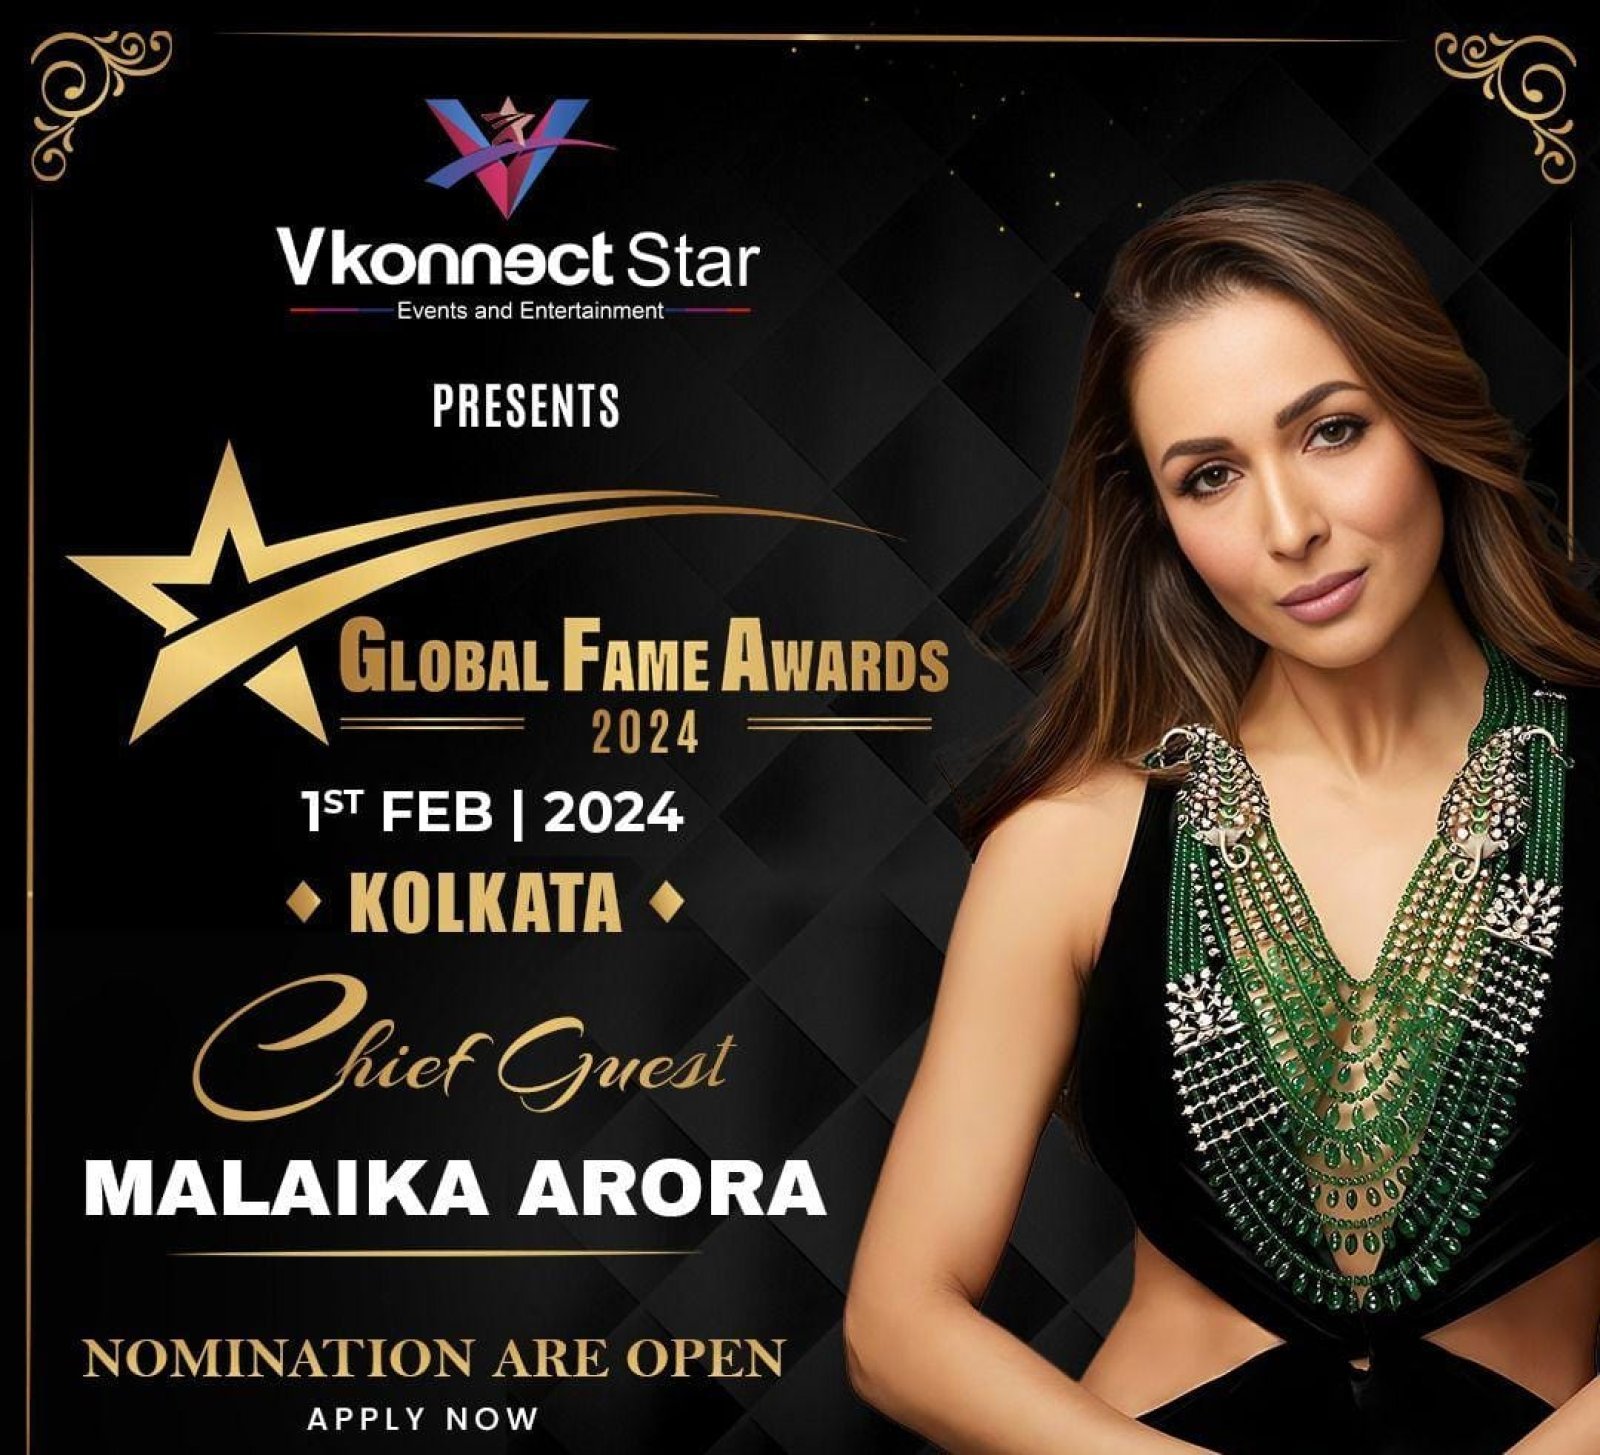 Malaika Arora to Shine as Chief Guest at the 'Global Fame Awards 2024' on 1st February in Kolkata